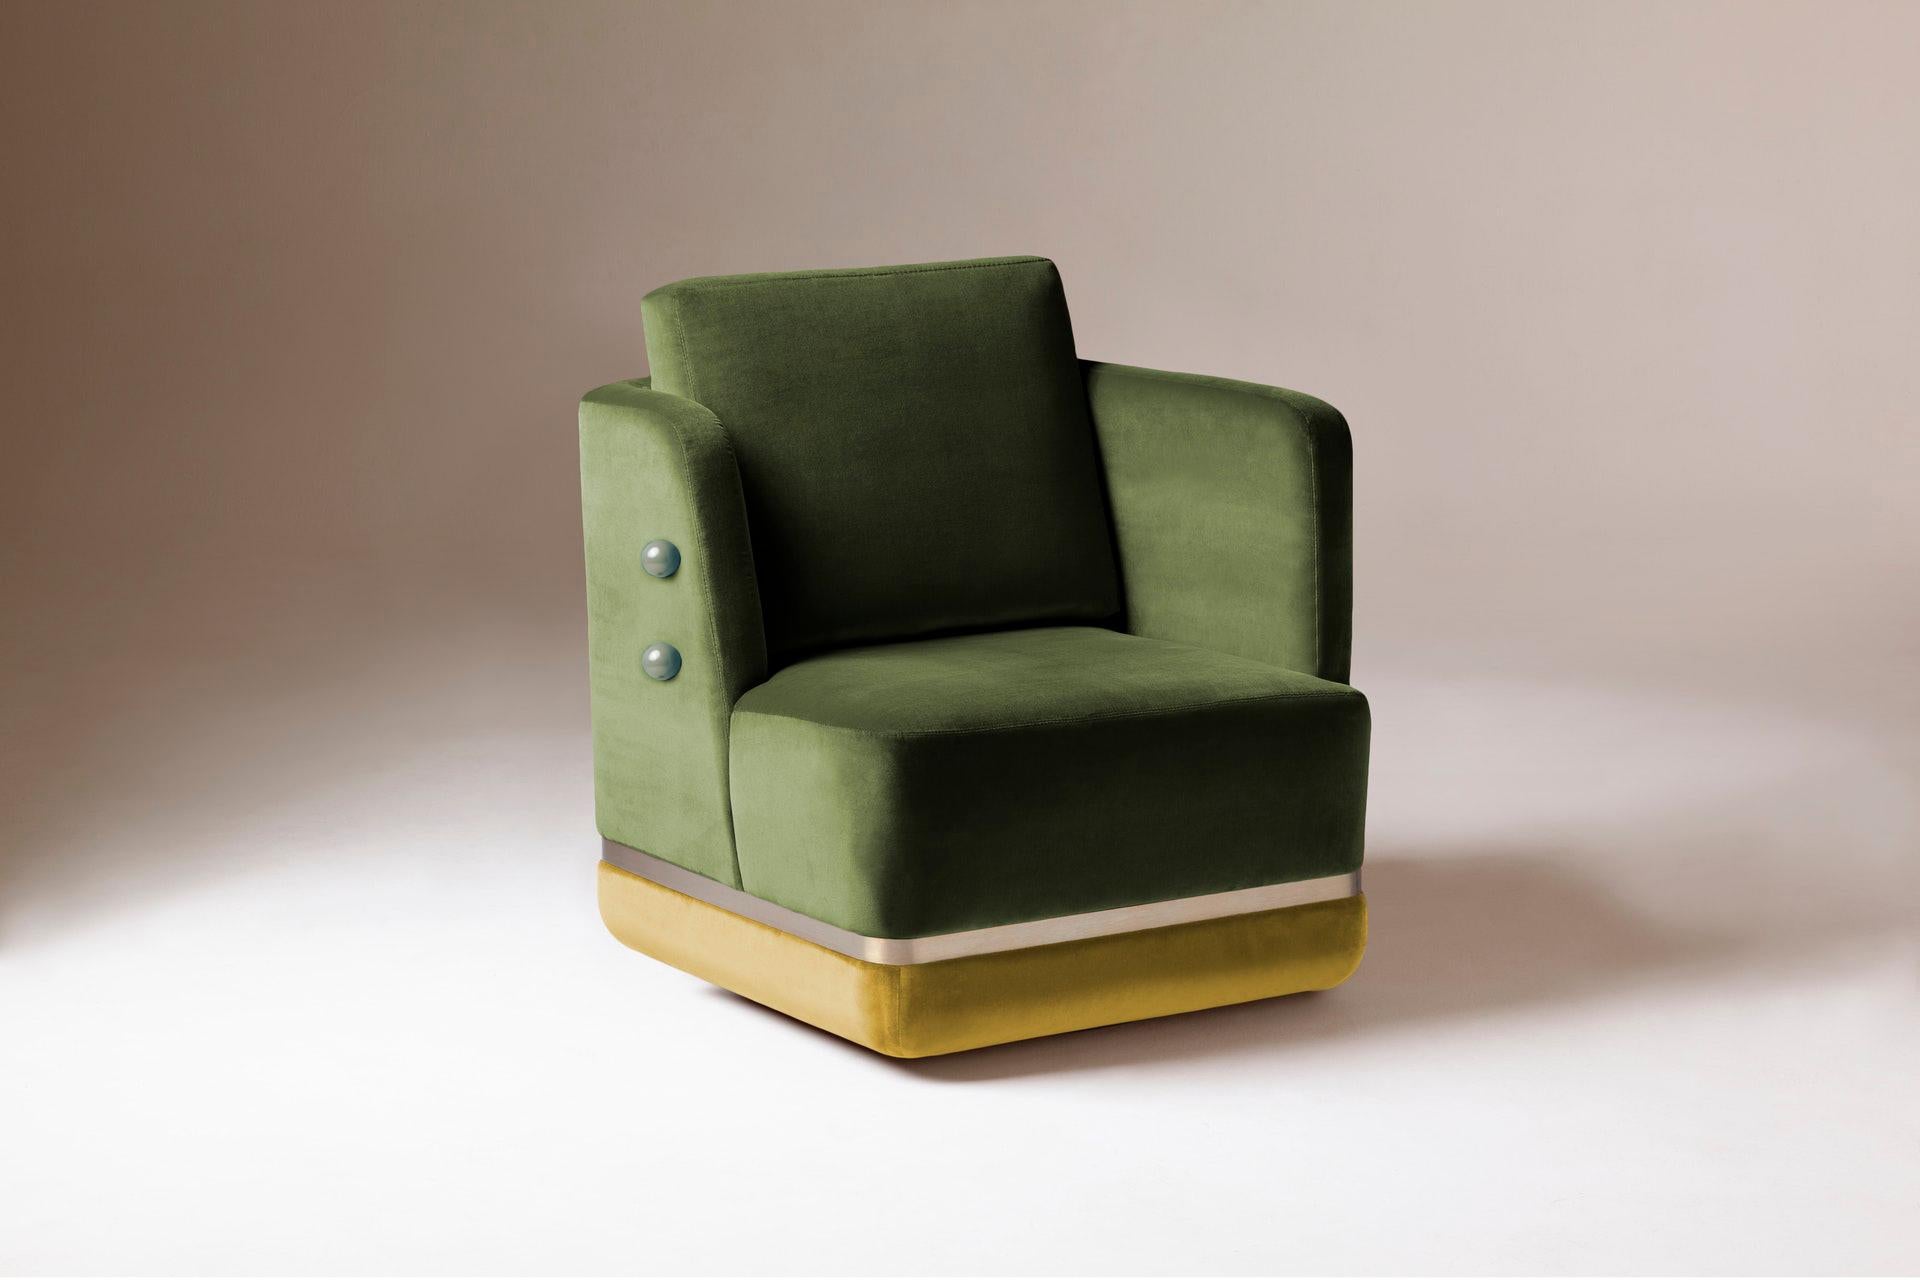 Swivel armchair with soft cotton velvet by Pierre Frey in Kiwi and Dijon color and satin brass detail. New and Made to Order. 

If you are planning on ordering an upholstery item with COM upholstery, please follow these instructions: 
- Let us know